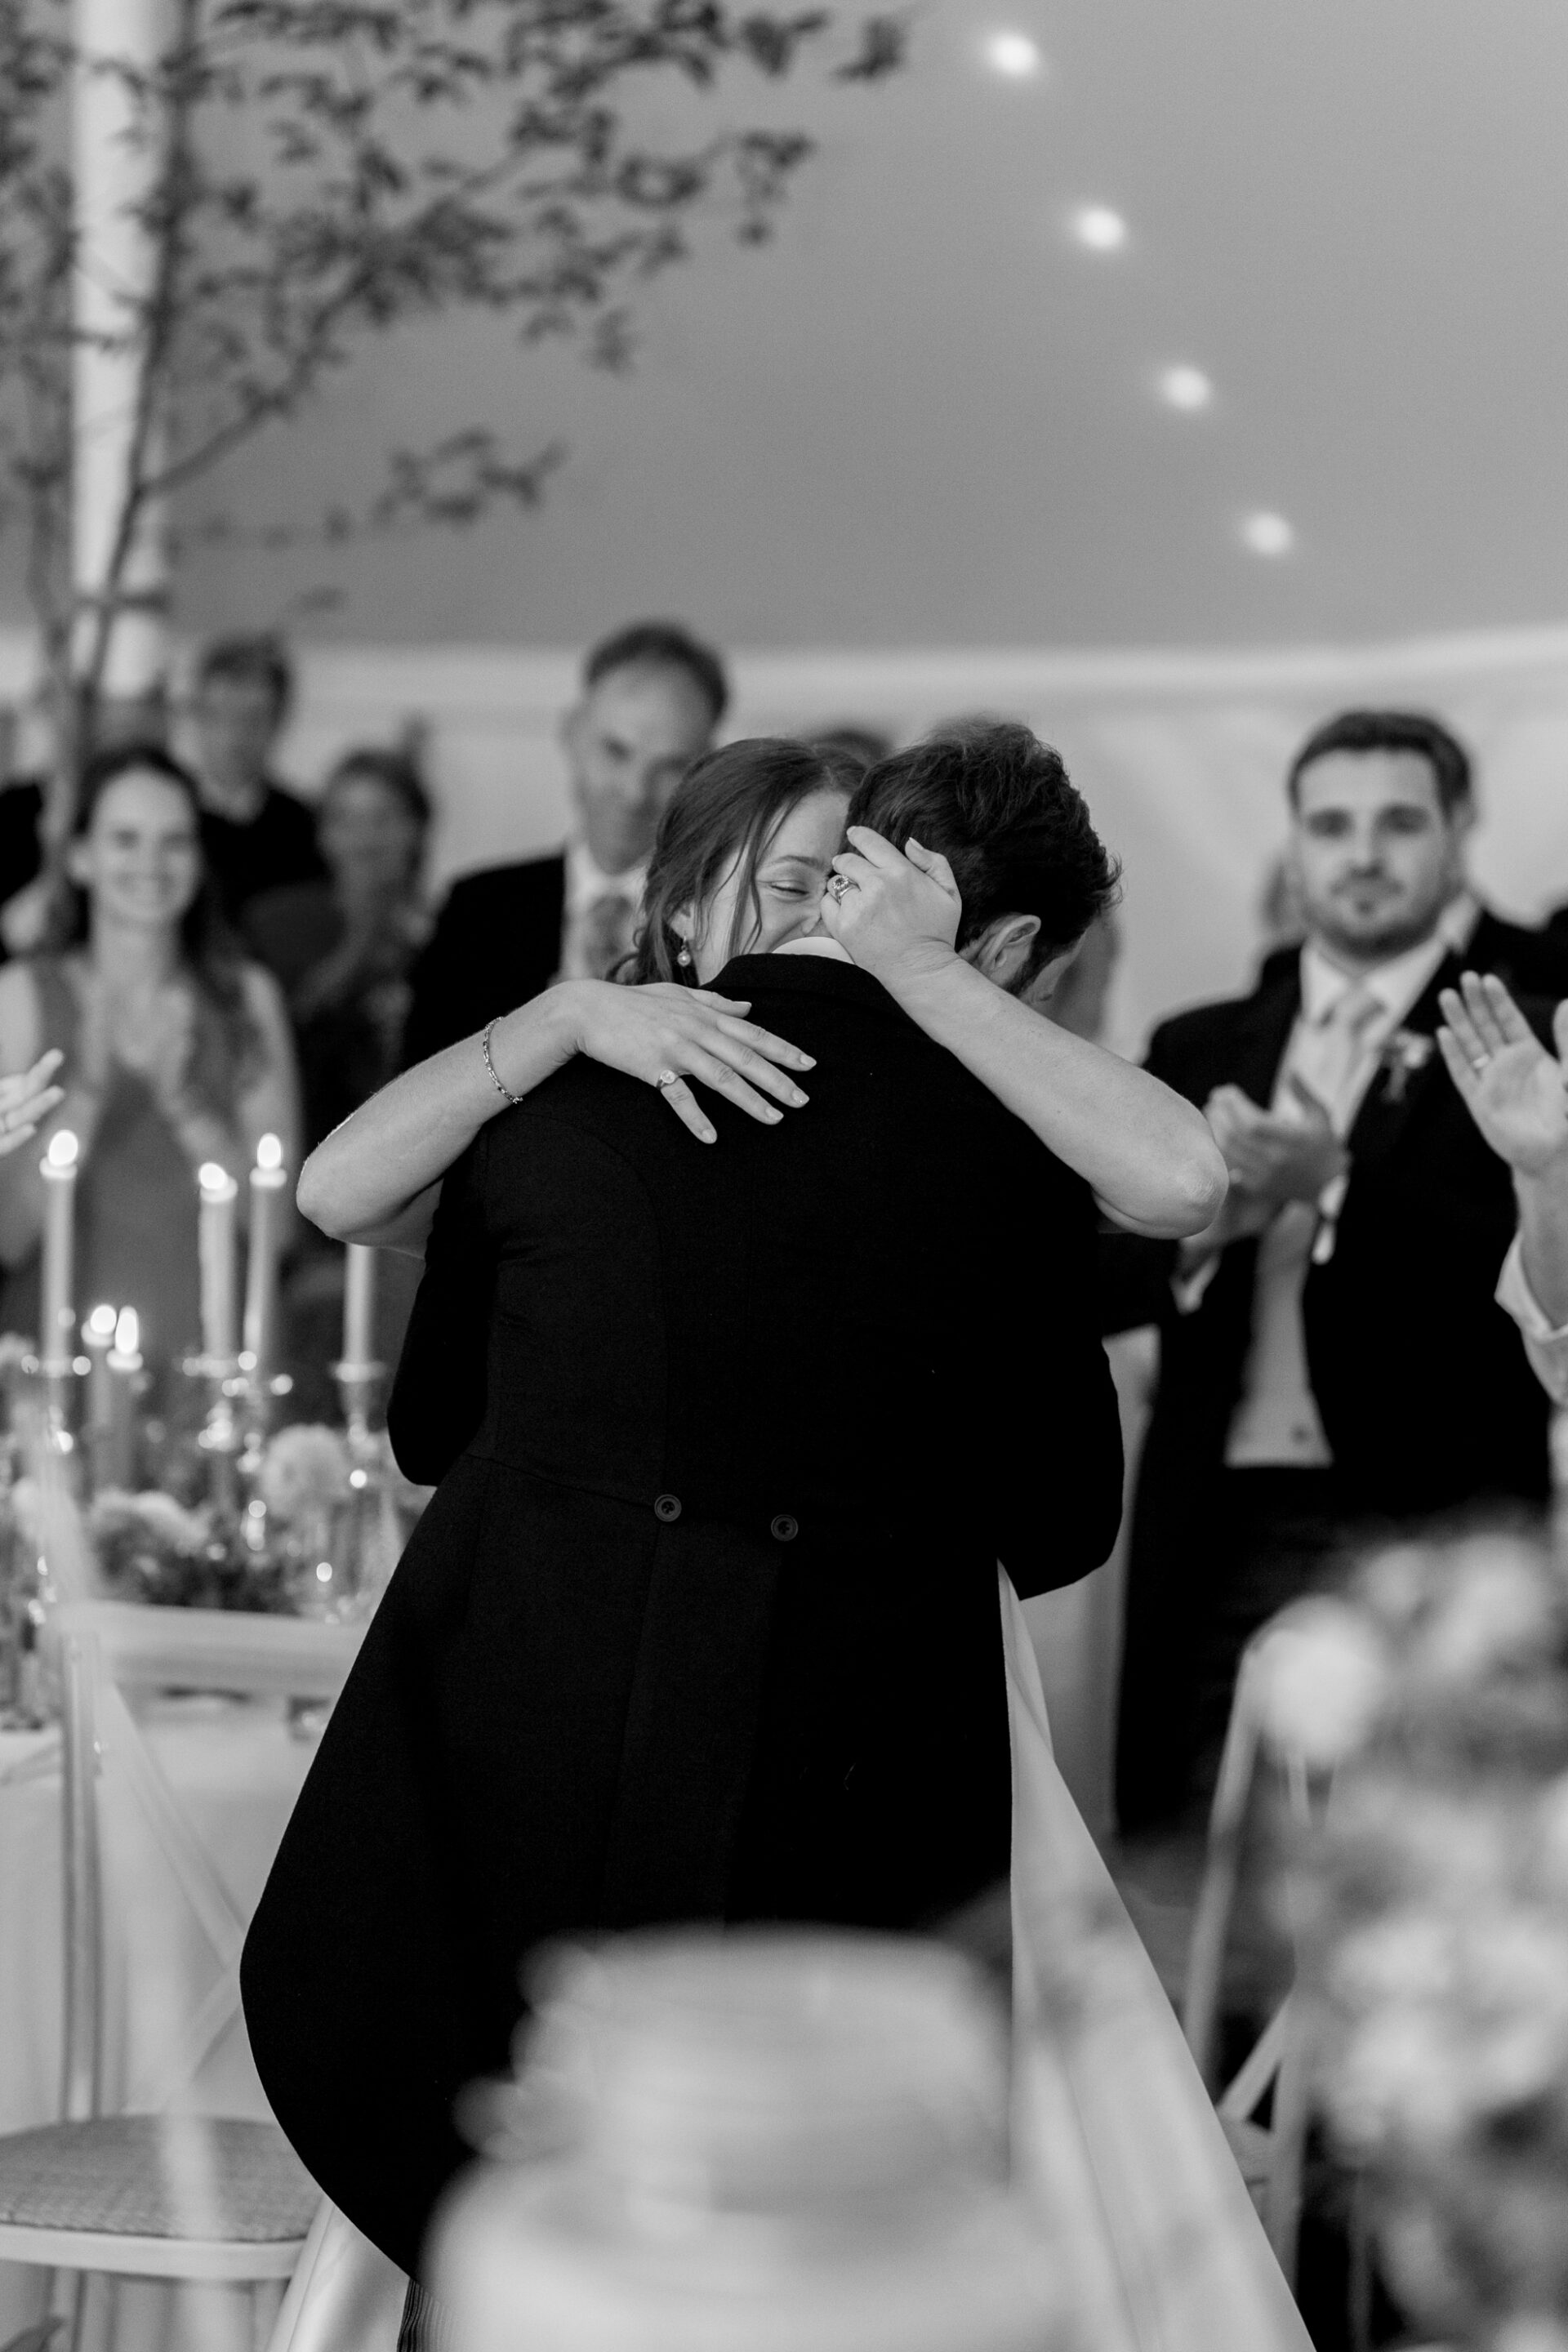 The bride and groom share an embrace during their Somerset marquee wedding